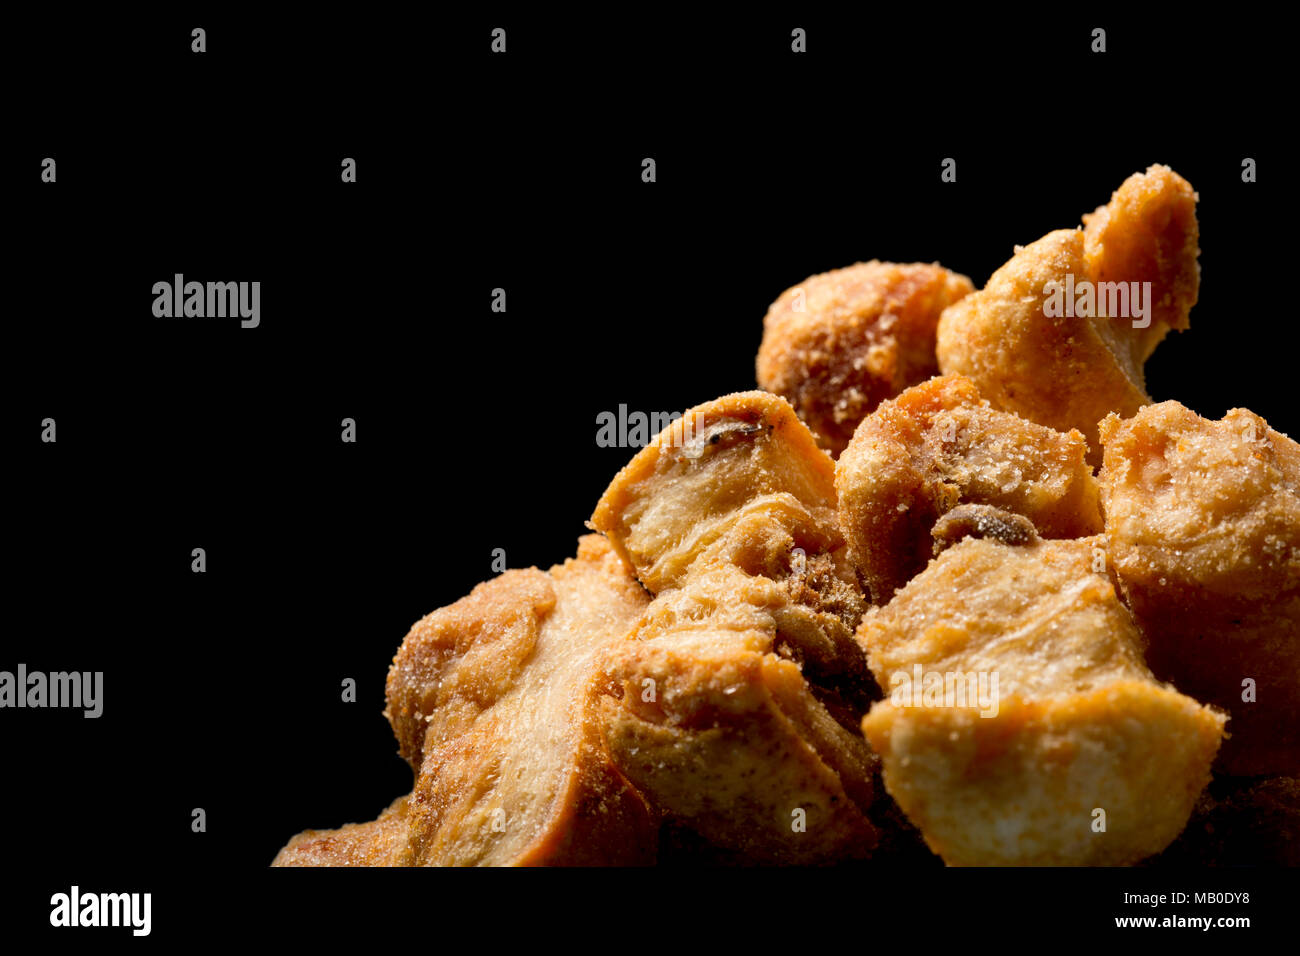 Pork scratchings from a packet bought in a supermarket. UK Stock Photo